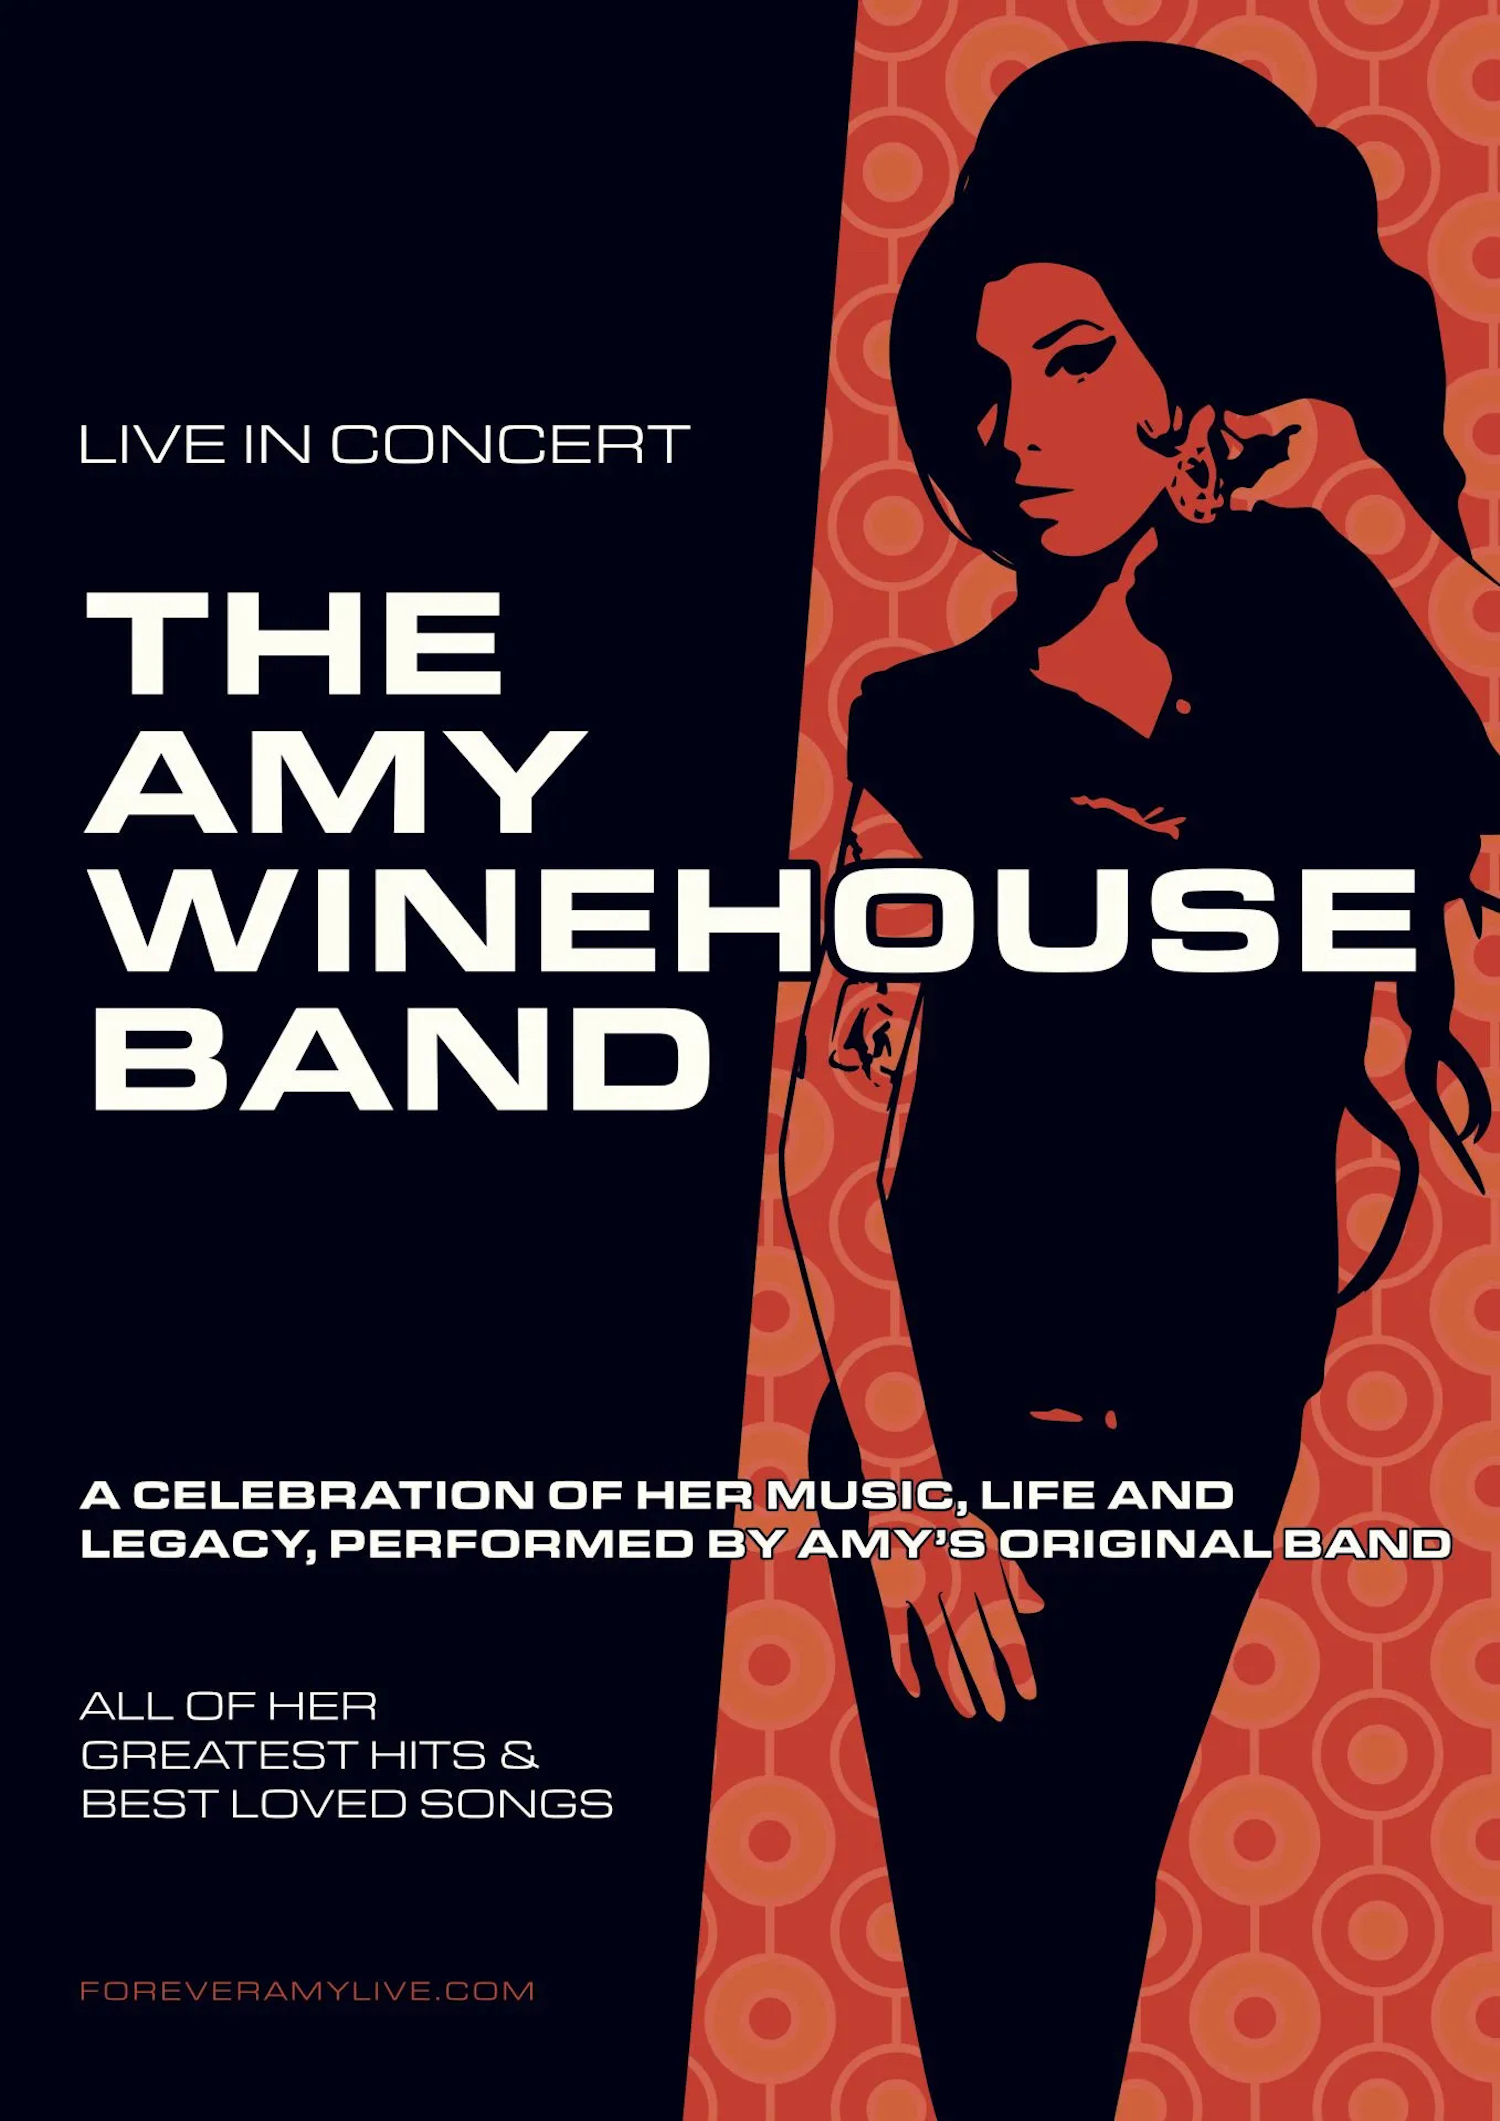 THE AMY WINEHOUSE BAND